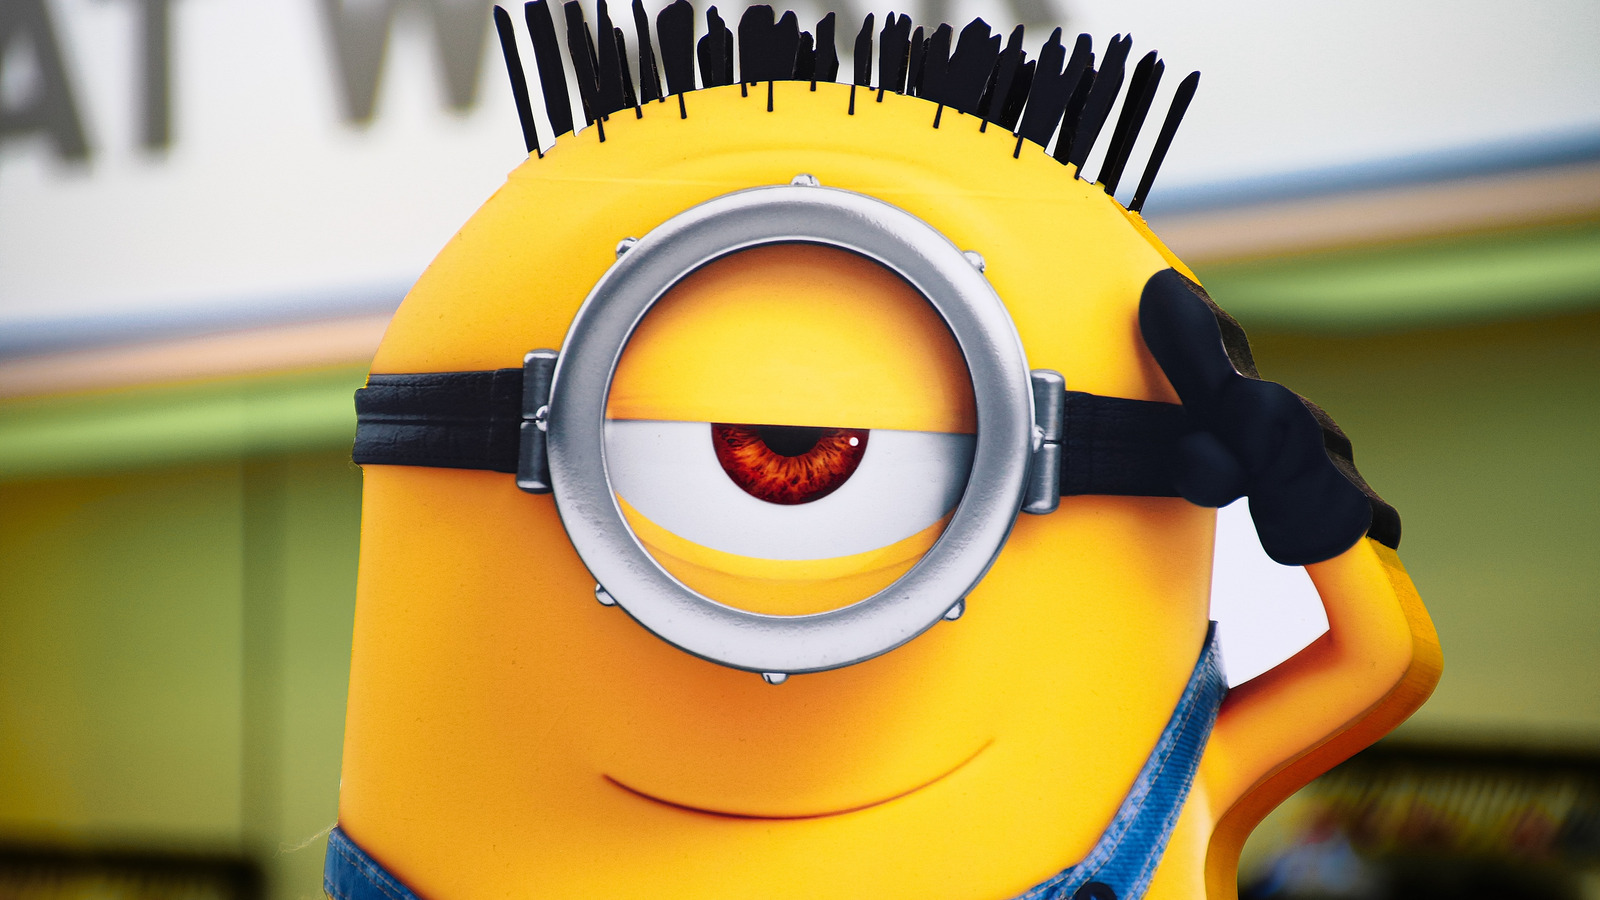 despicable me 2 characters names list